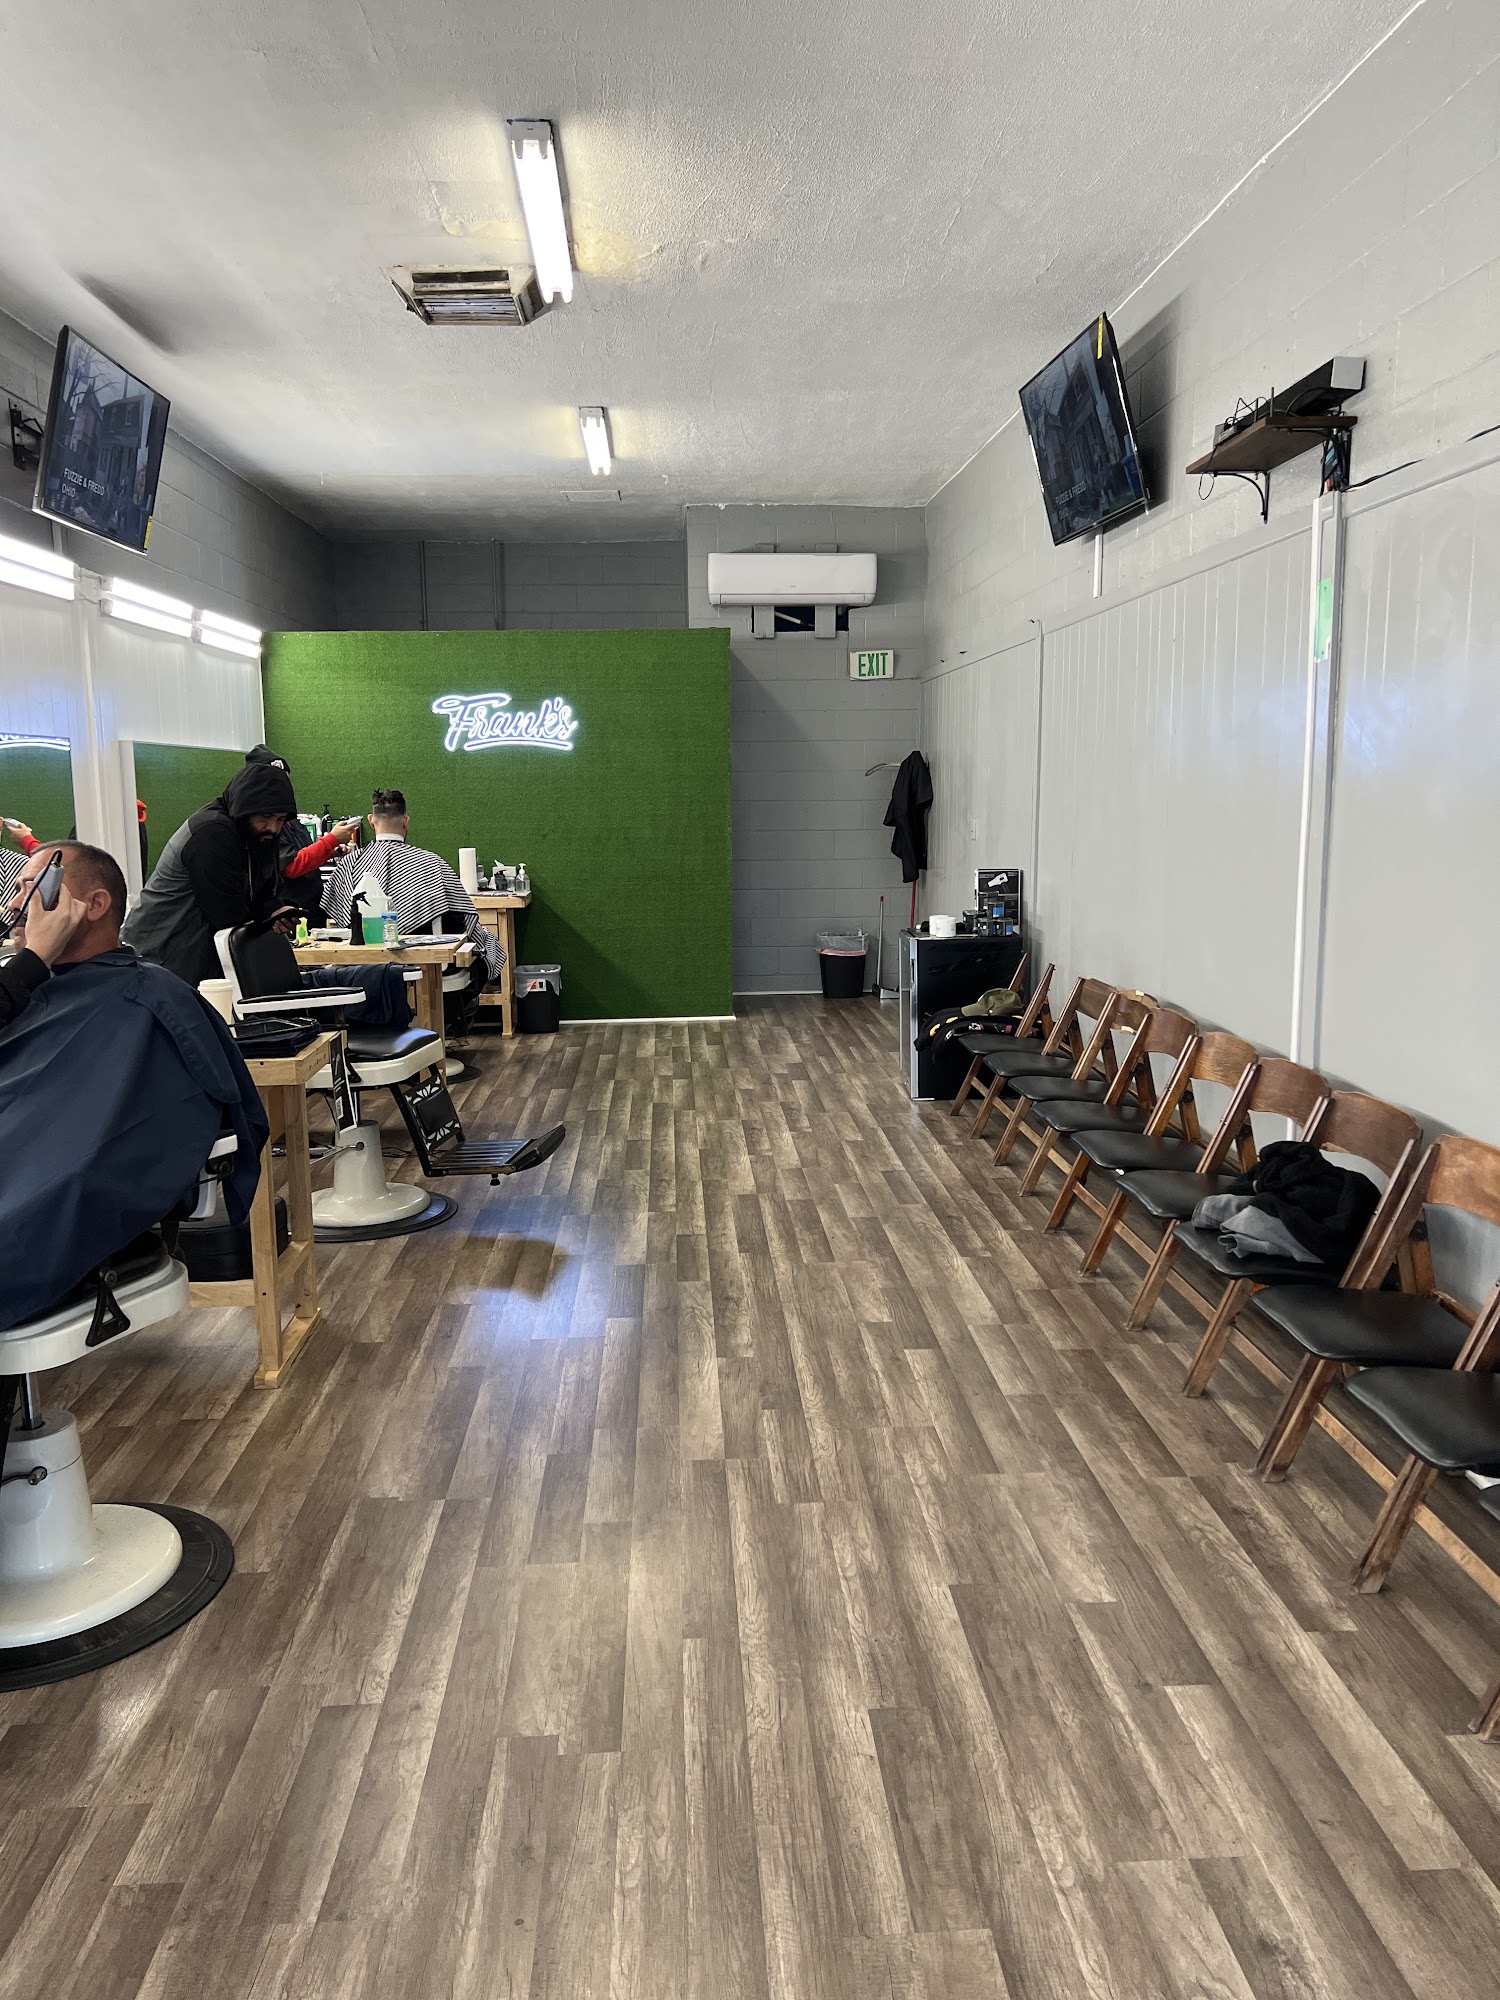 Frank's Barbershop 4127 Florence Ave, Bell California 90201